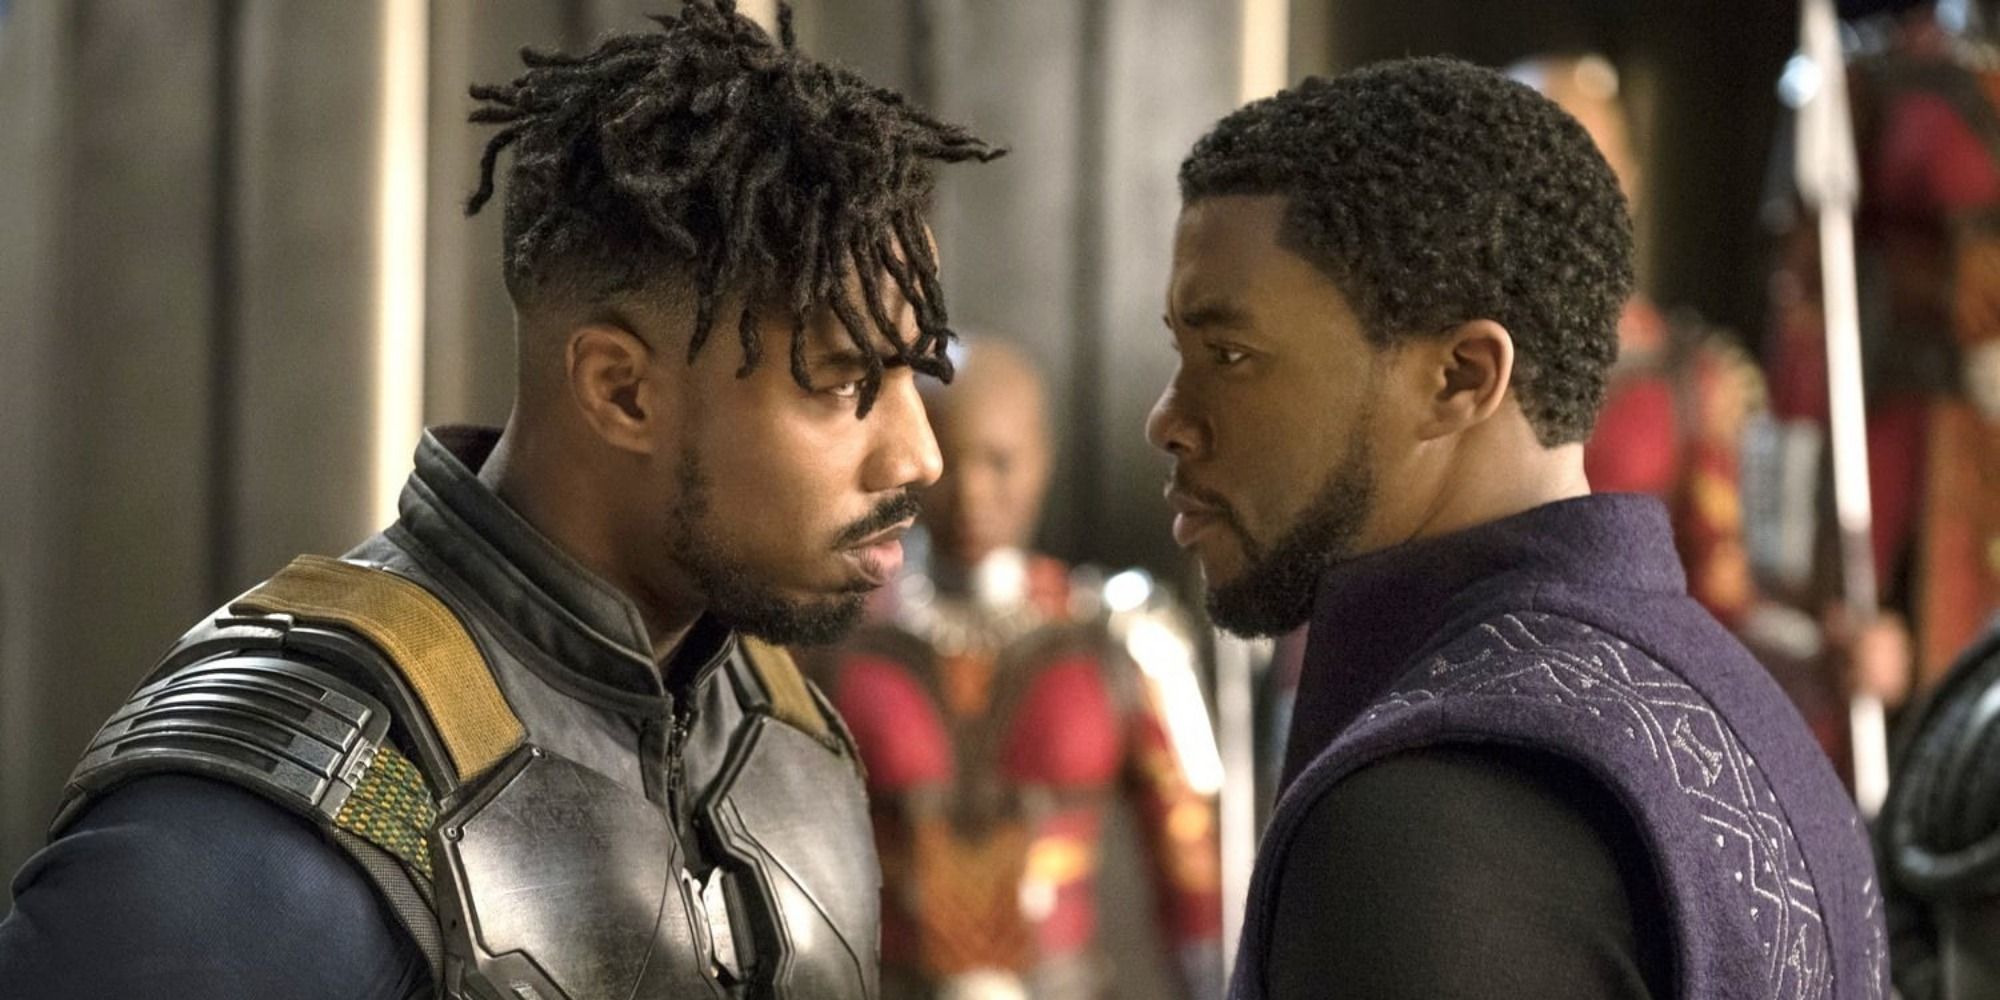 Killmonger squares up to T'Challa in Black Panther